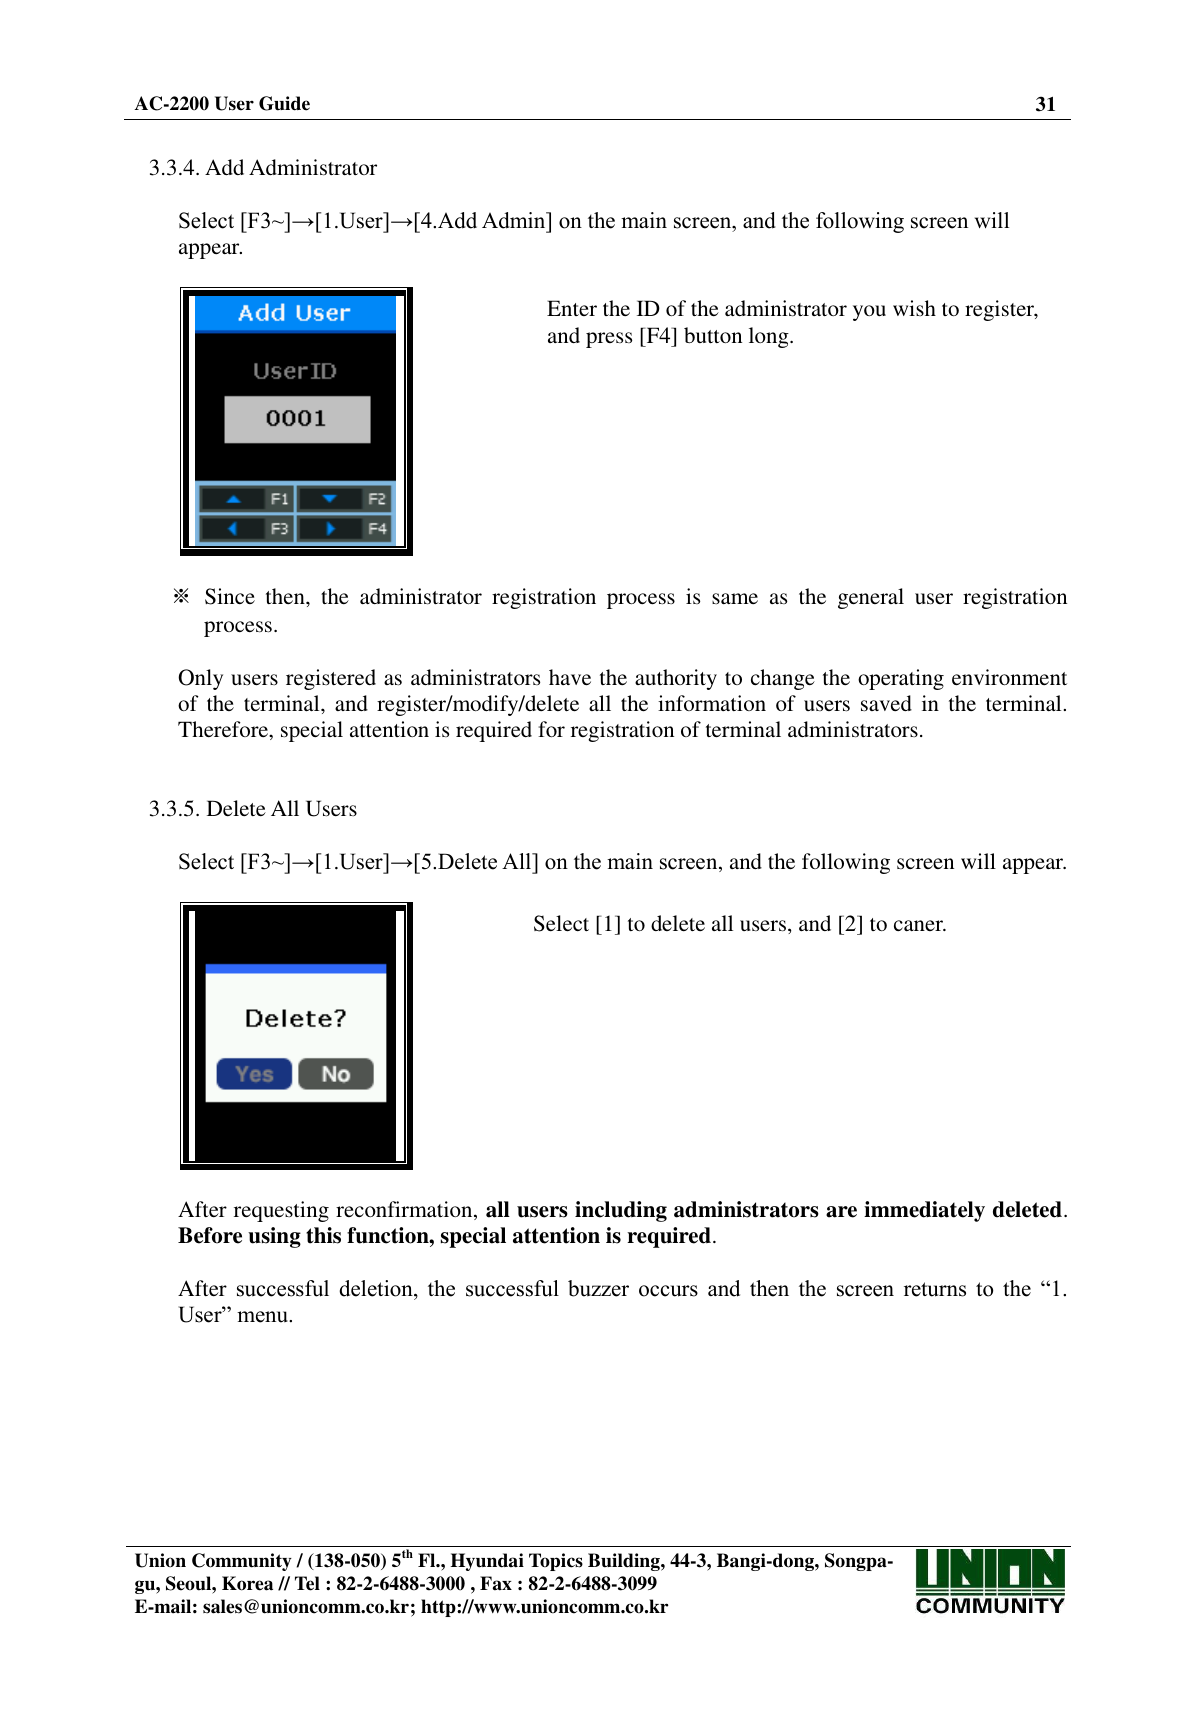  AC-2200 User Guide 31   Union Community / (138-050) 5th Fl., Hyundai Topics Building, 44-3, Bangi-dong, Songpa-gu, Seoul, Korea // Tel : 82-2-6488-3000 , Fax : 82-2-6488-3099 E-mail: sales@unioncomm.co.kr; http://www.unioncomm.co.kr    3.3.4. Add Administrator  Select [F3~]→[1.User]→[4.Add Admin] on the main screen, and the following screen will appear.    Enter the ID of the administrator you wish to register, and press [F4] button long.   ※  Since  then,  the  administrator  registration  process  is  same  as  the  general  user  registration process.  Only users registered as administrators have the authority to change the operating environment of  the terminal,  and  register/modify/delete all  the  information  of users  saved  in the  terminal. Therefore, special attention is required for registration of terminal administrators.   3.3.5. Delete All Users  Select [F3~]→[1.User]→[5.Delete All] on the main screen, and the following screen will appear.    Select [1] to delete all users, and [2] to caner.  After requesting reconfirmation, all users including administrators are immediately deleted. Before using this function, special attention is required.  After successful  deletion,  the  successful  buzzer  occurs  and  then  the  screen  returns  to  the  “1. User” menu.  